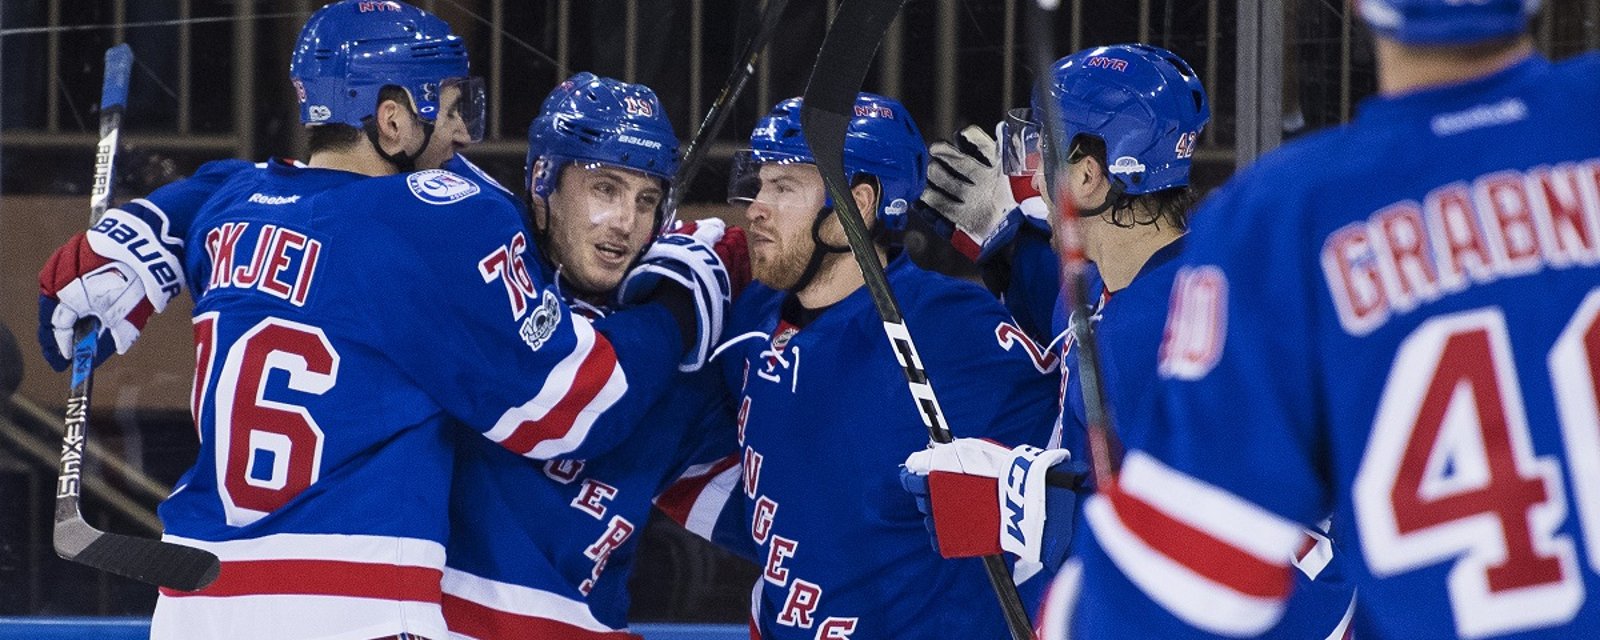 Rangers forward will miss several months after surgery. 